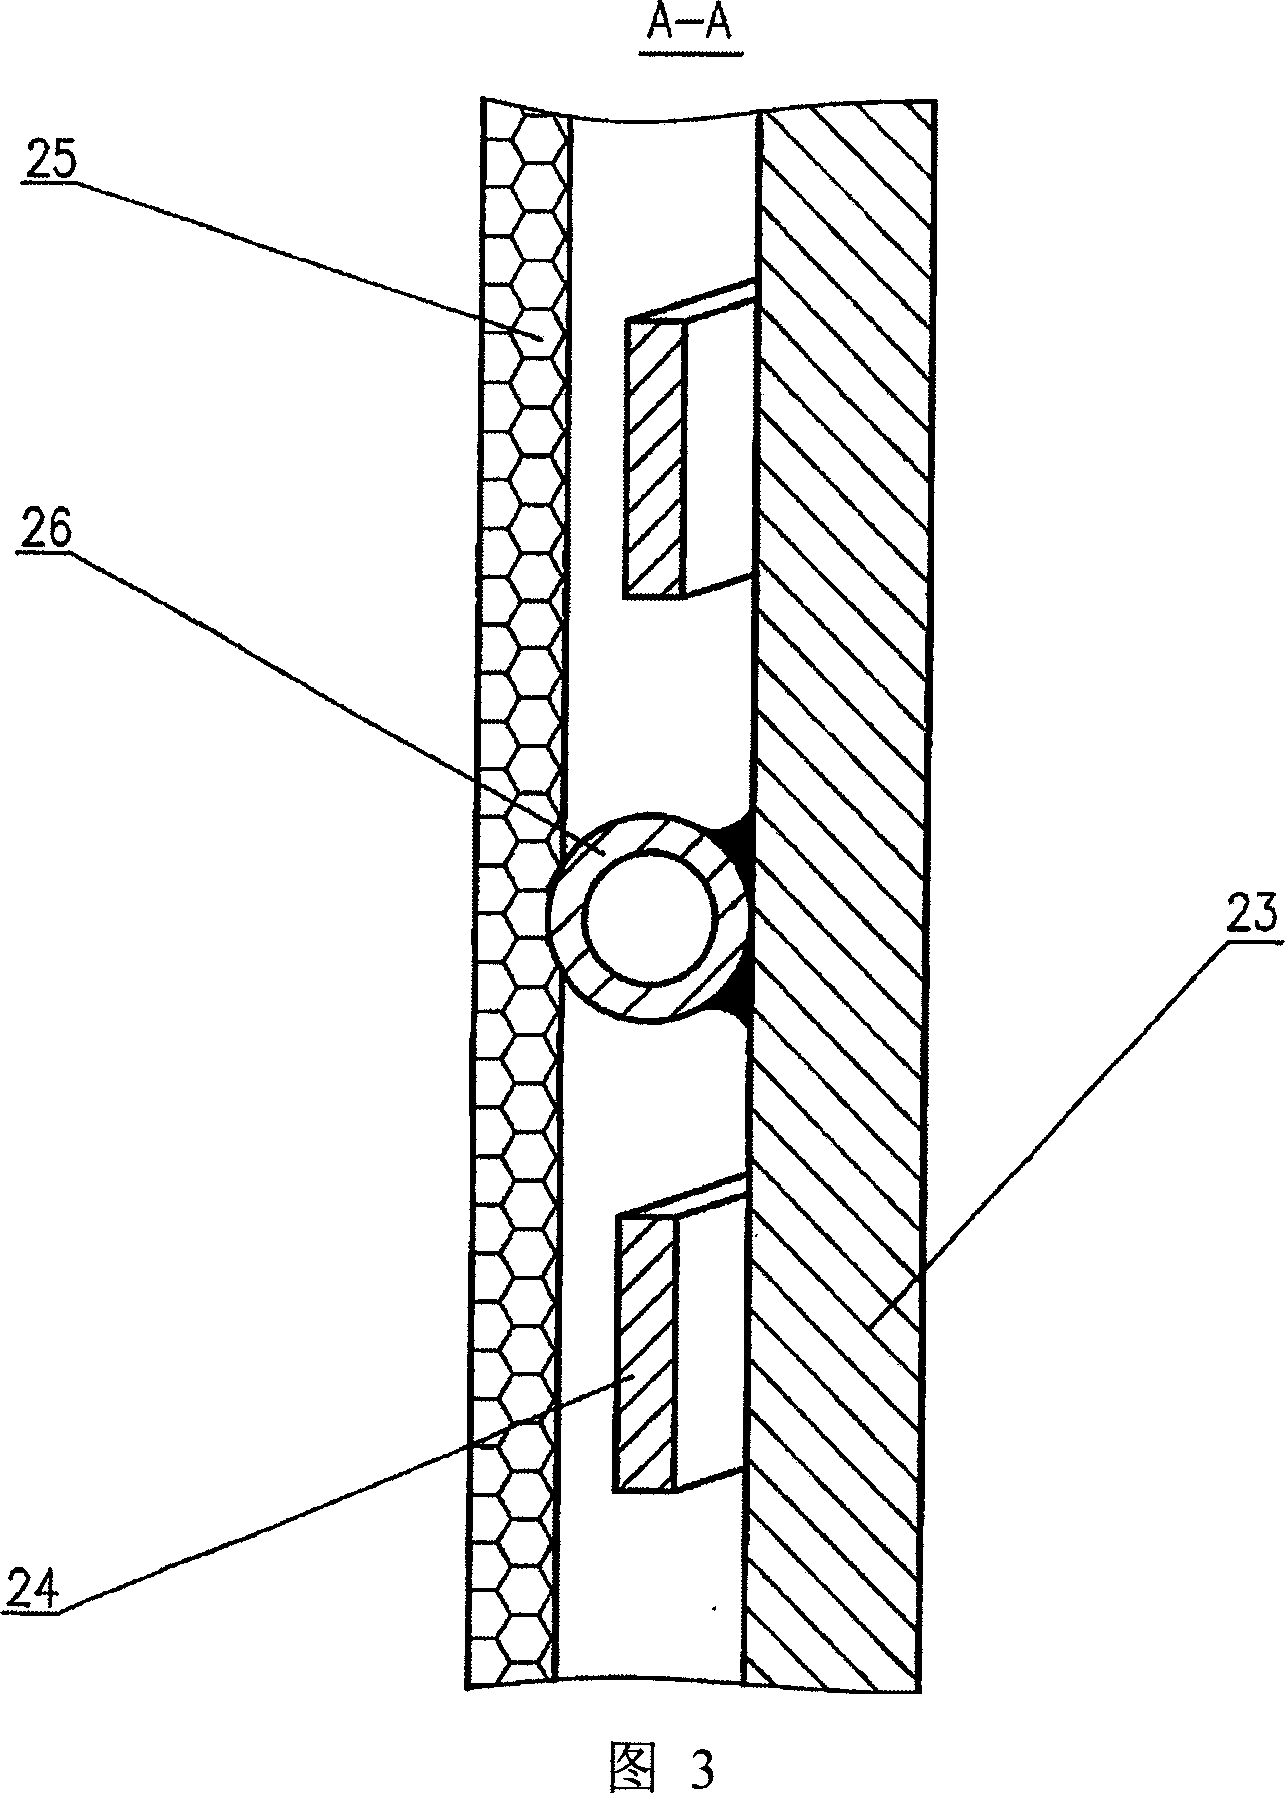 Method and apparatus for vacuum deposition by vaporizing metals and metal alloys